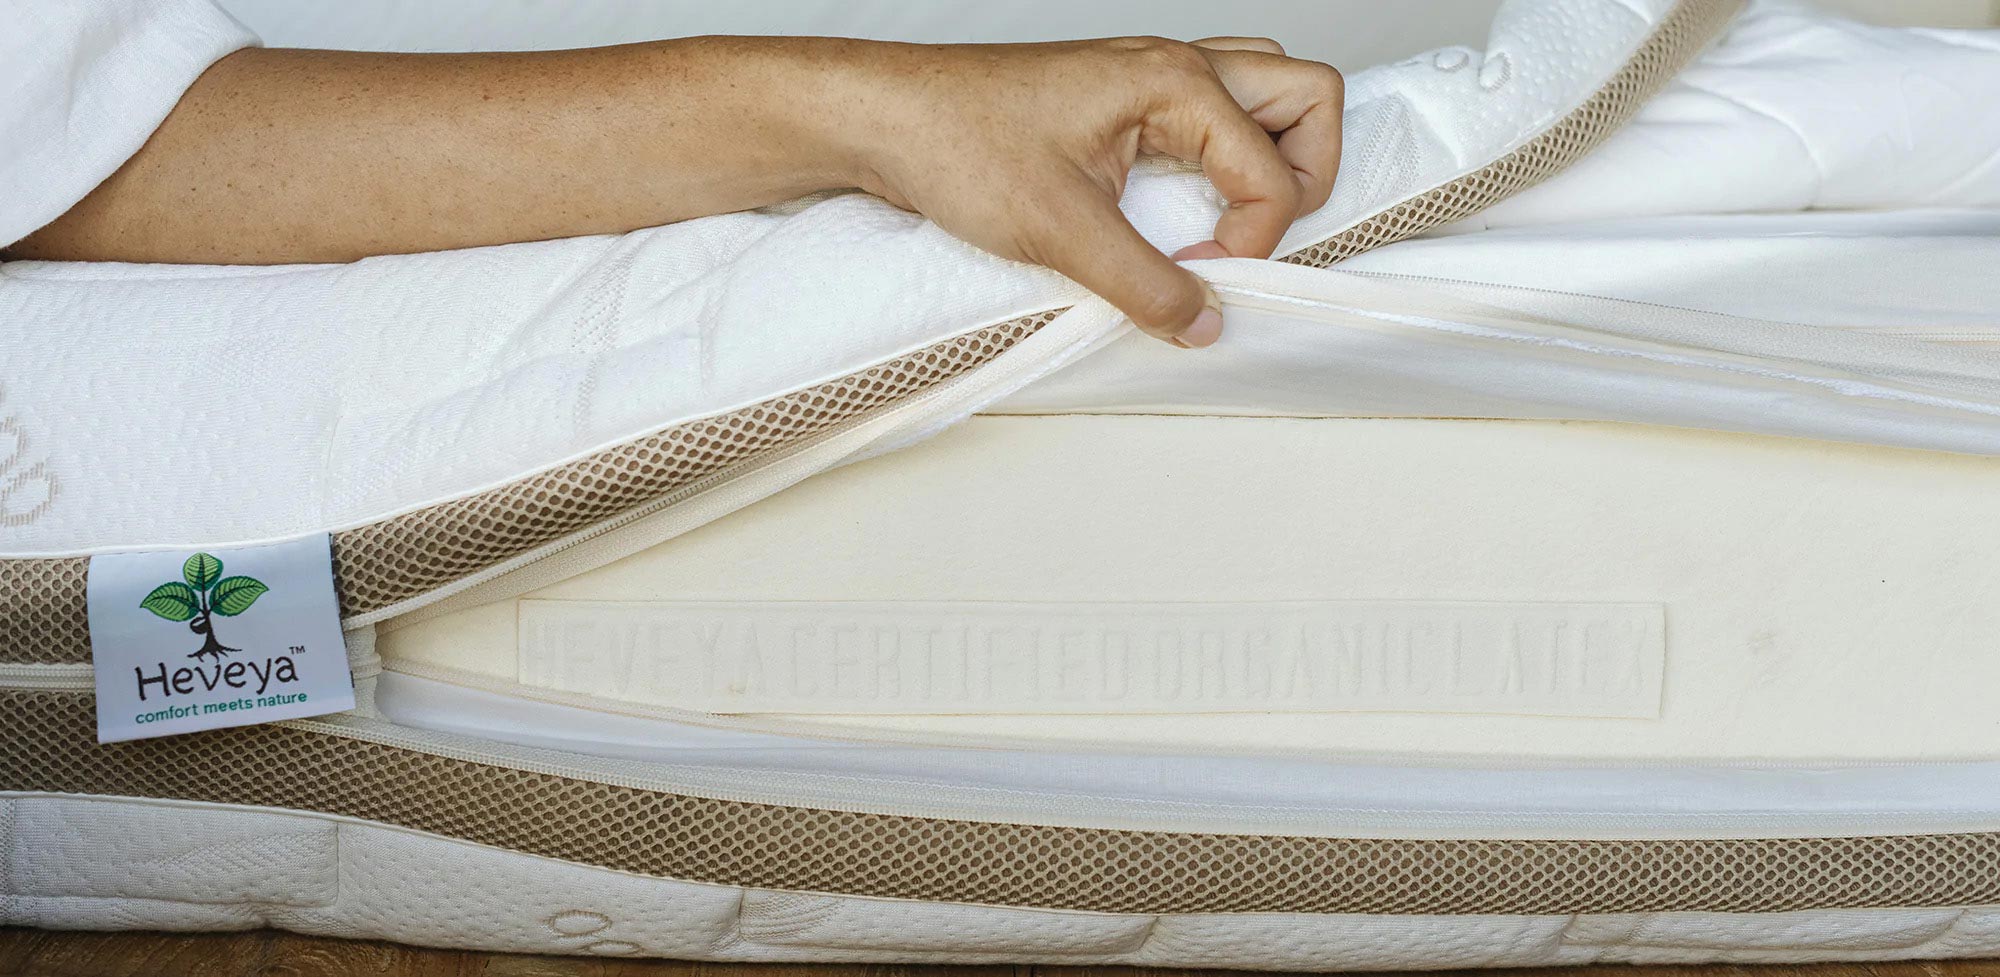 How To Remove Bed Bugs From A Mattress